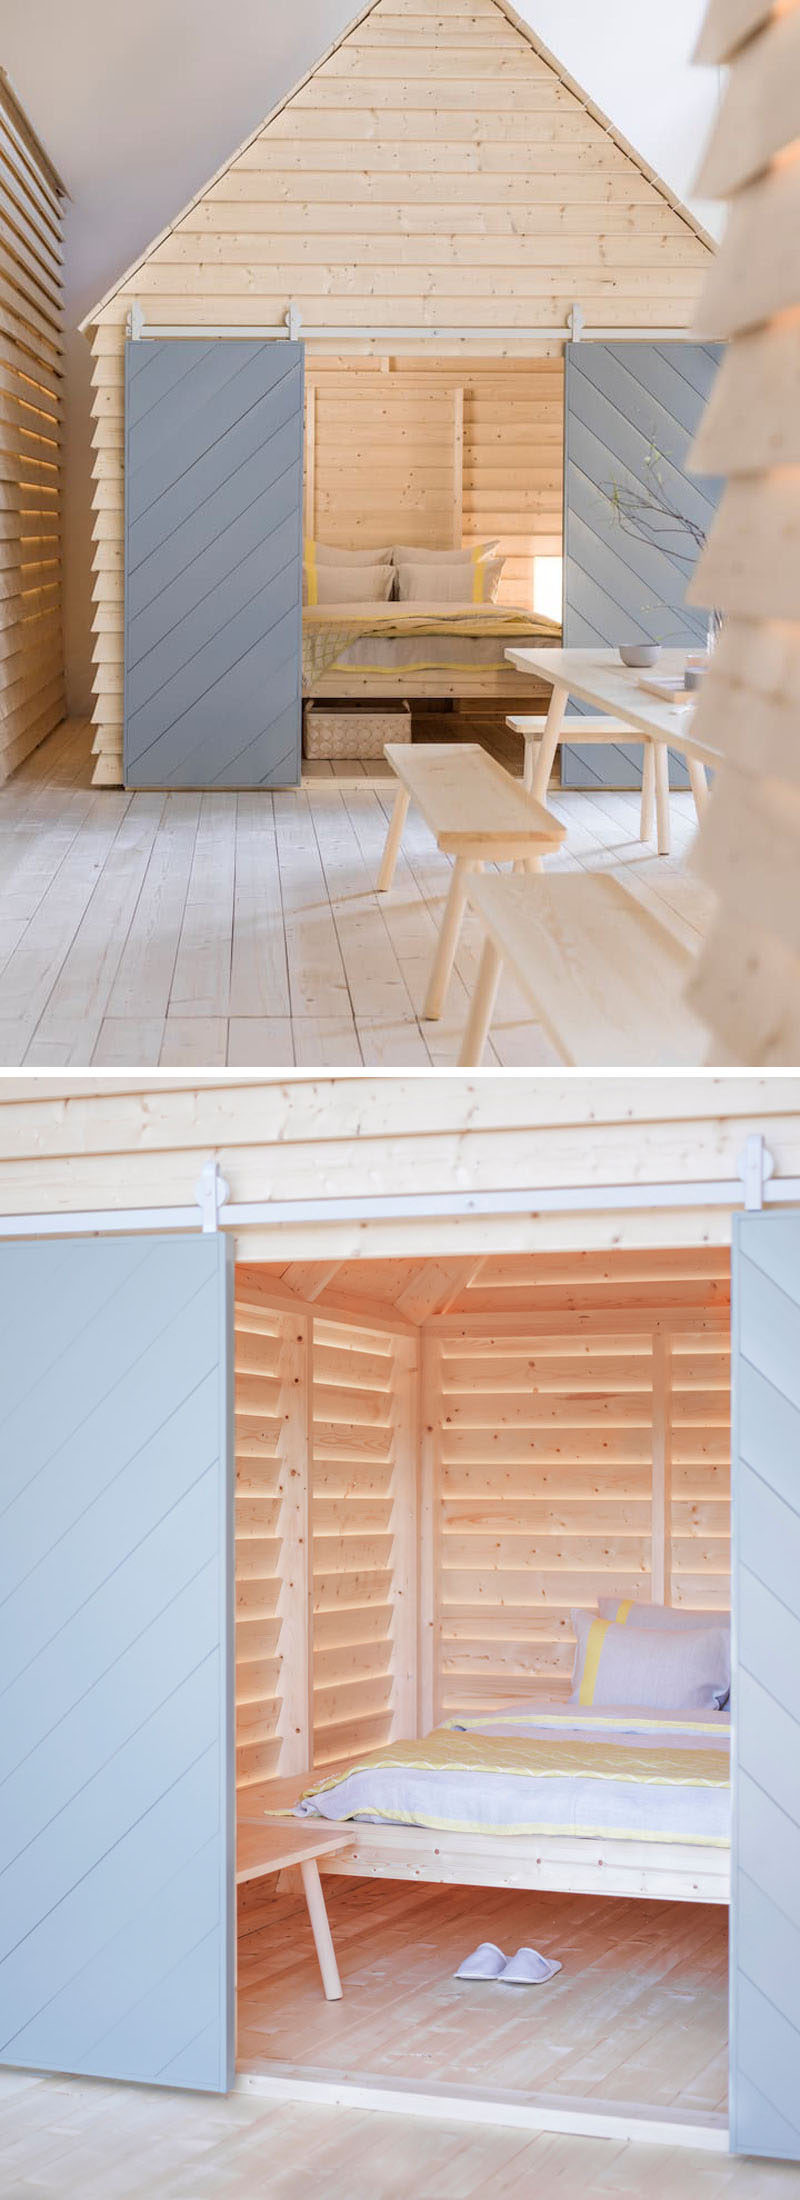 Six small cabins have been built inside the Finnish Institute in Paris so  people can experience the culture of Finland